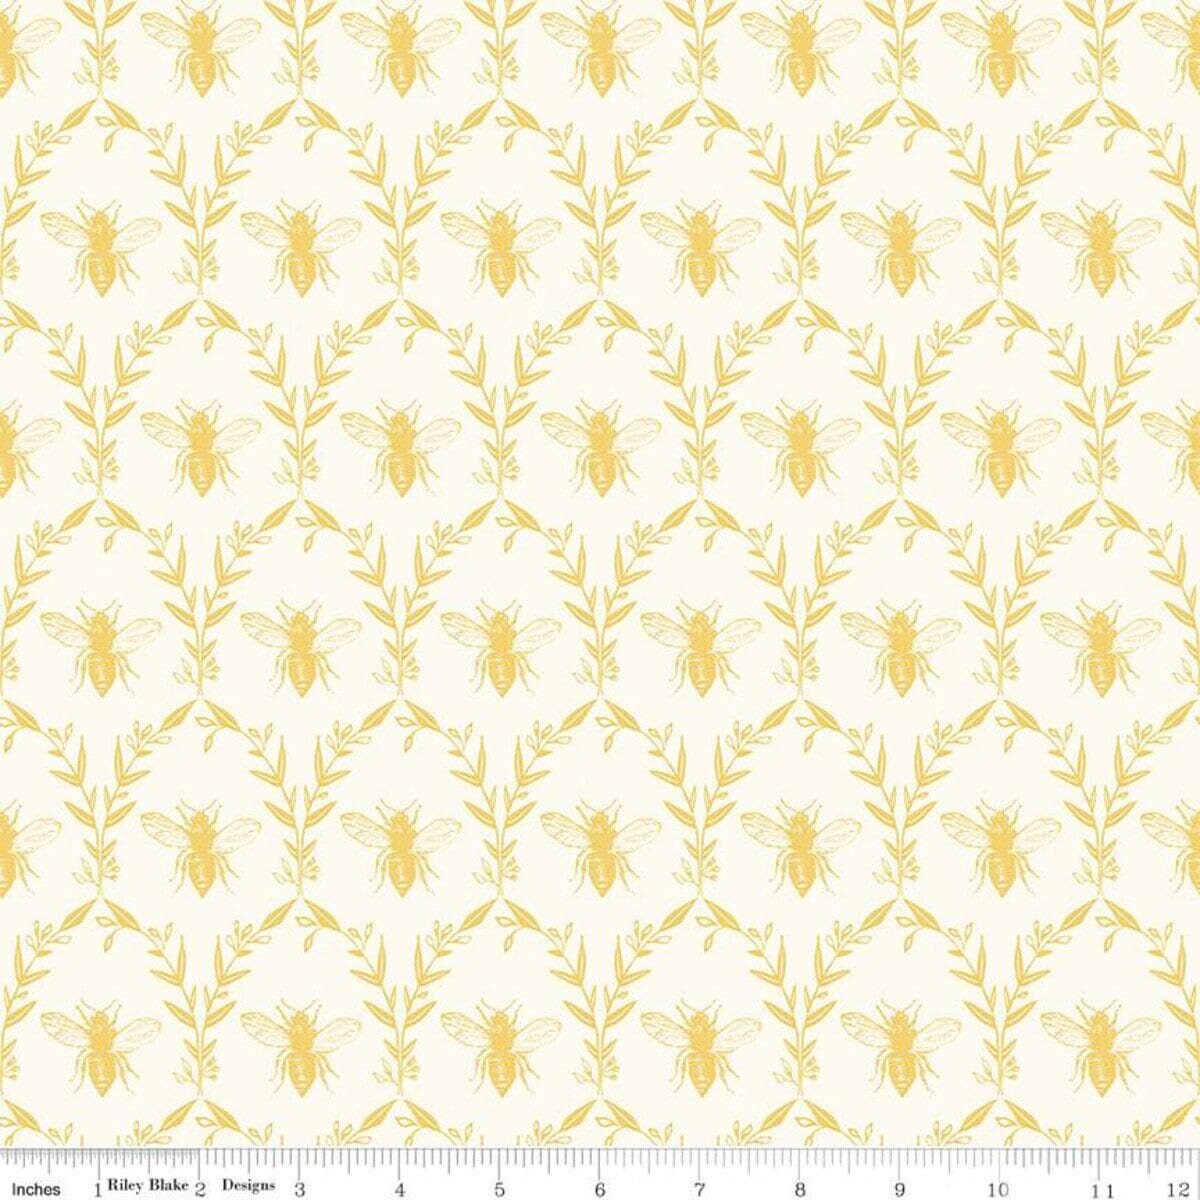 LAMINATED cotton fabric - Honey Bee Off-white (sold continuous by the half yard) Food Safe Fabric, BPA free